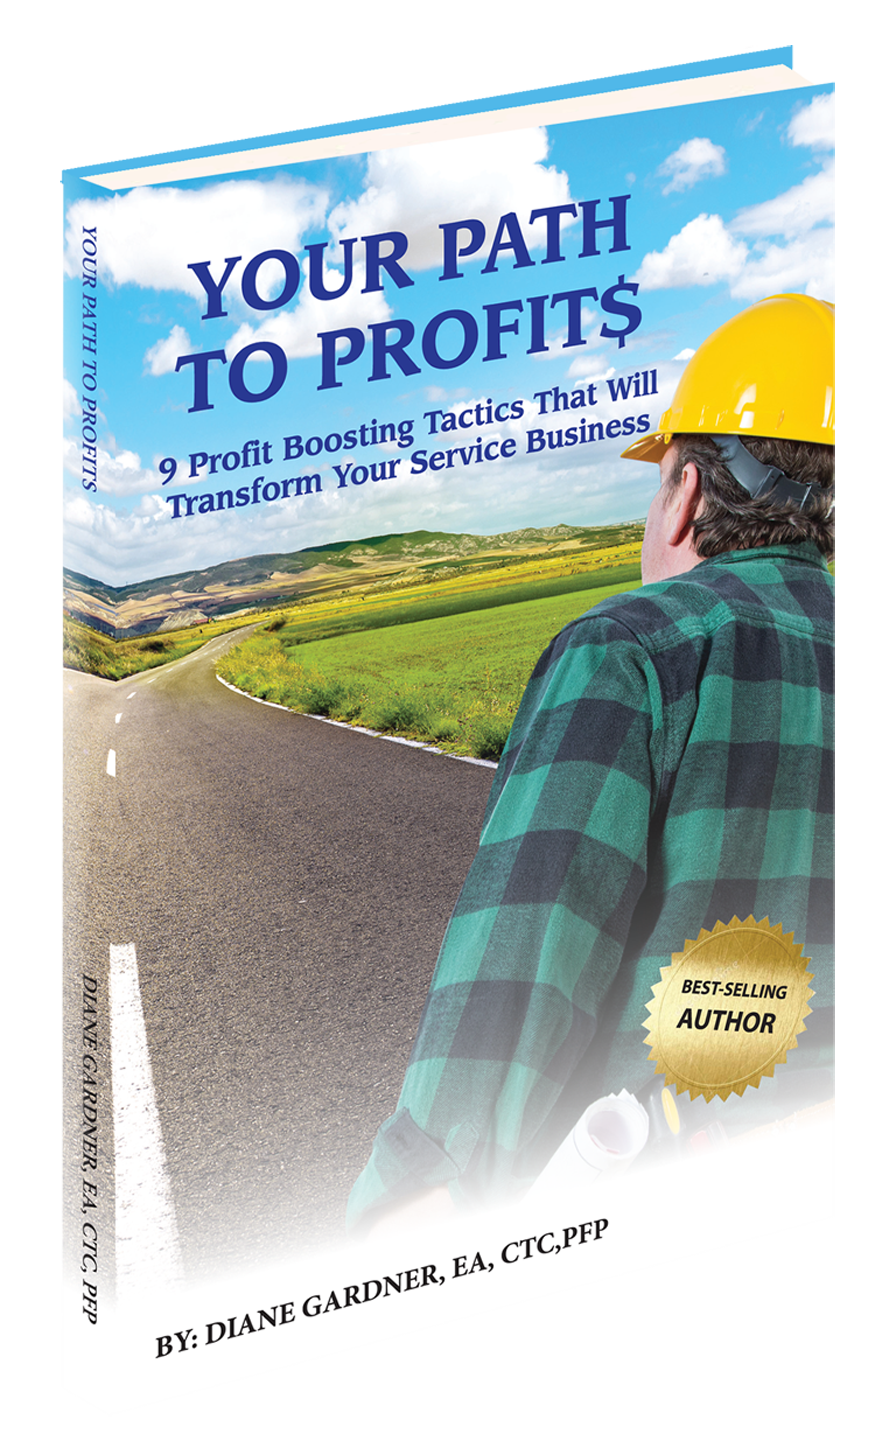 Your Path to Profits - 9 Profit Boosting Tactics That Will Transform Your Service Business